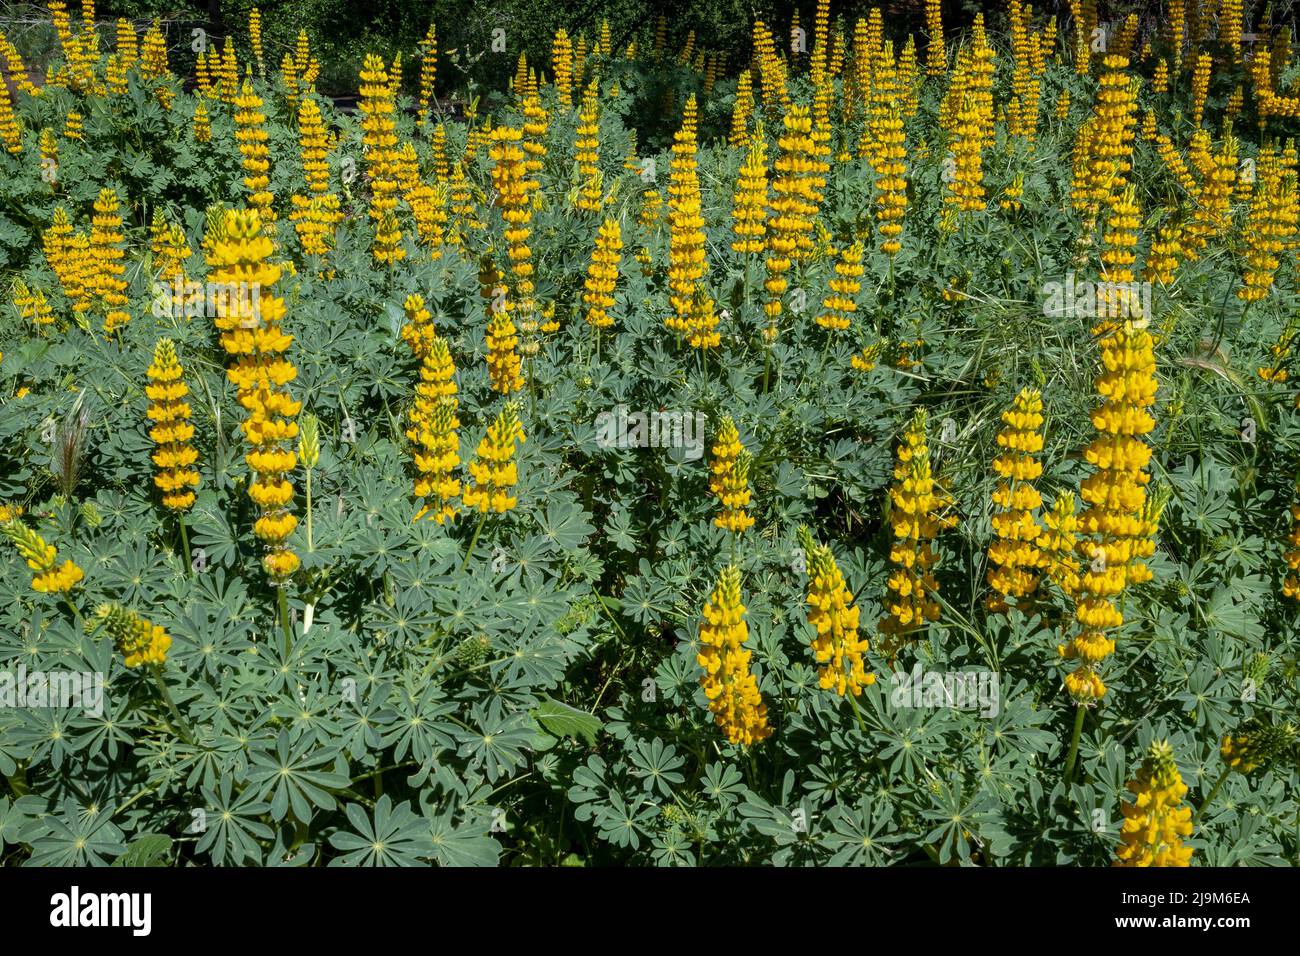 A patch of yellow Lupinus flowers viewed from the side Stock Photo